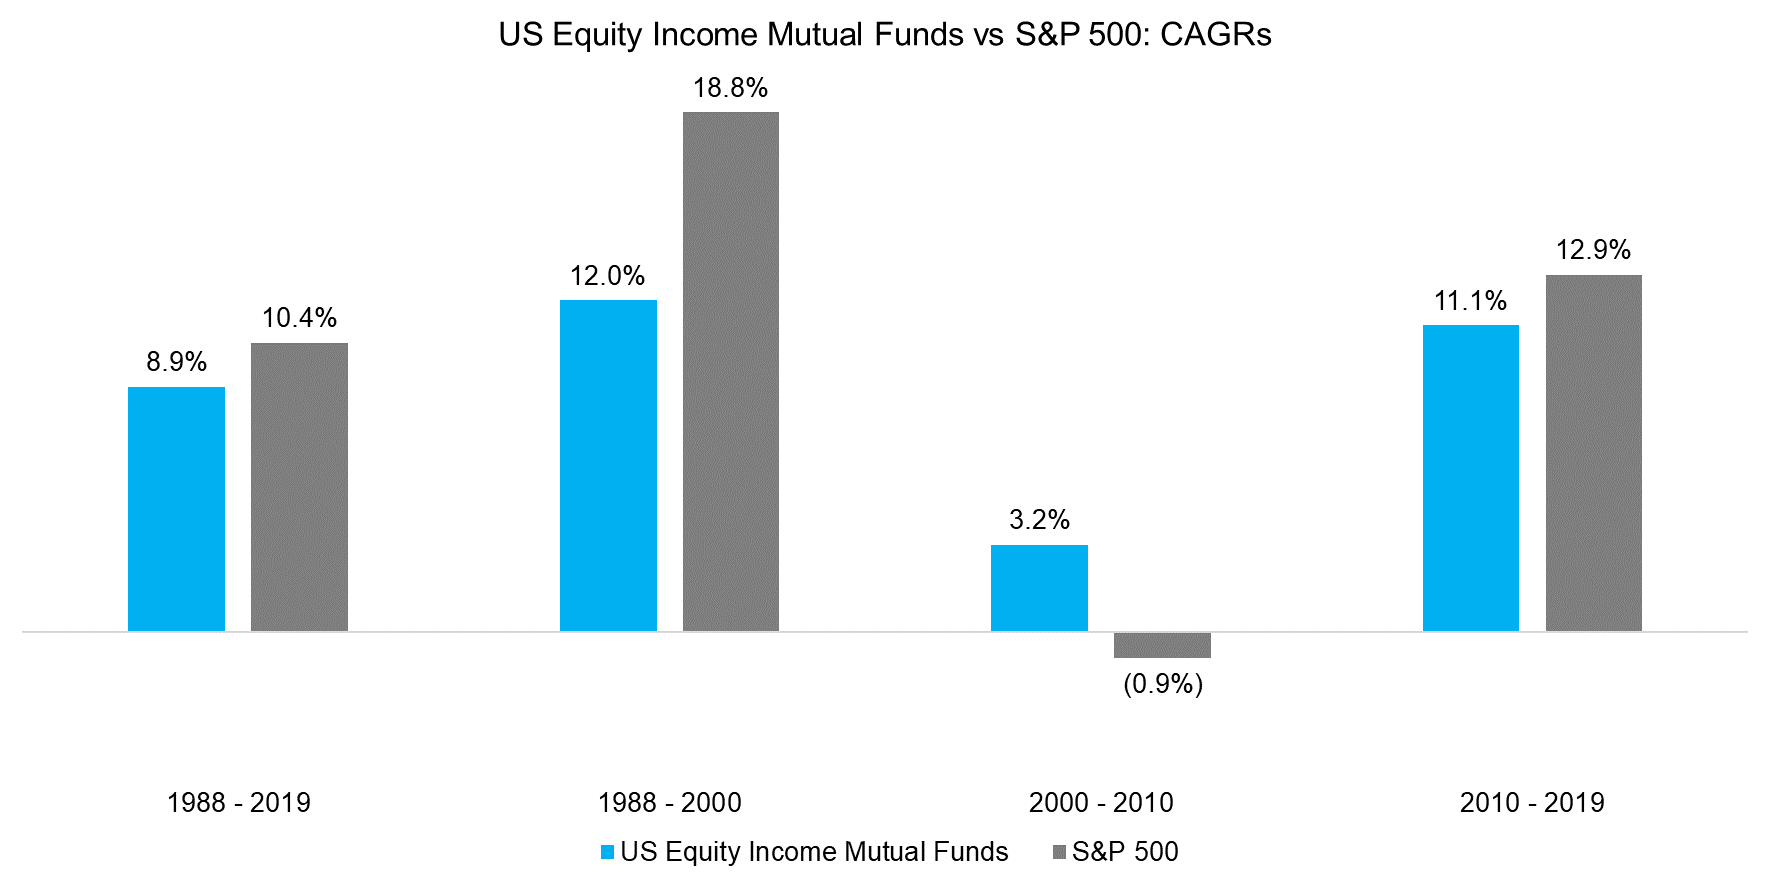 US Equity Income Mutual Funds vs S&P 500 CAGRs